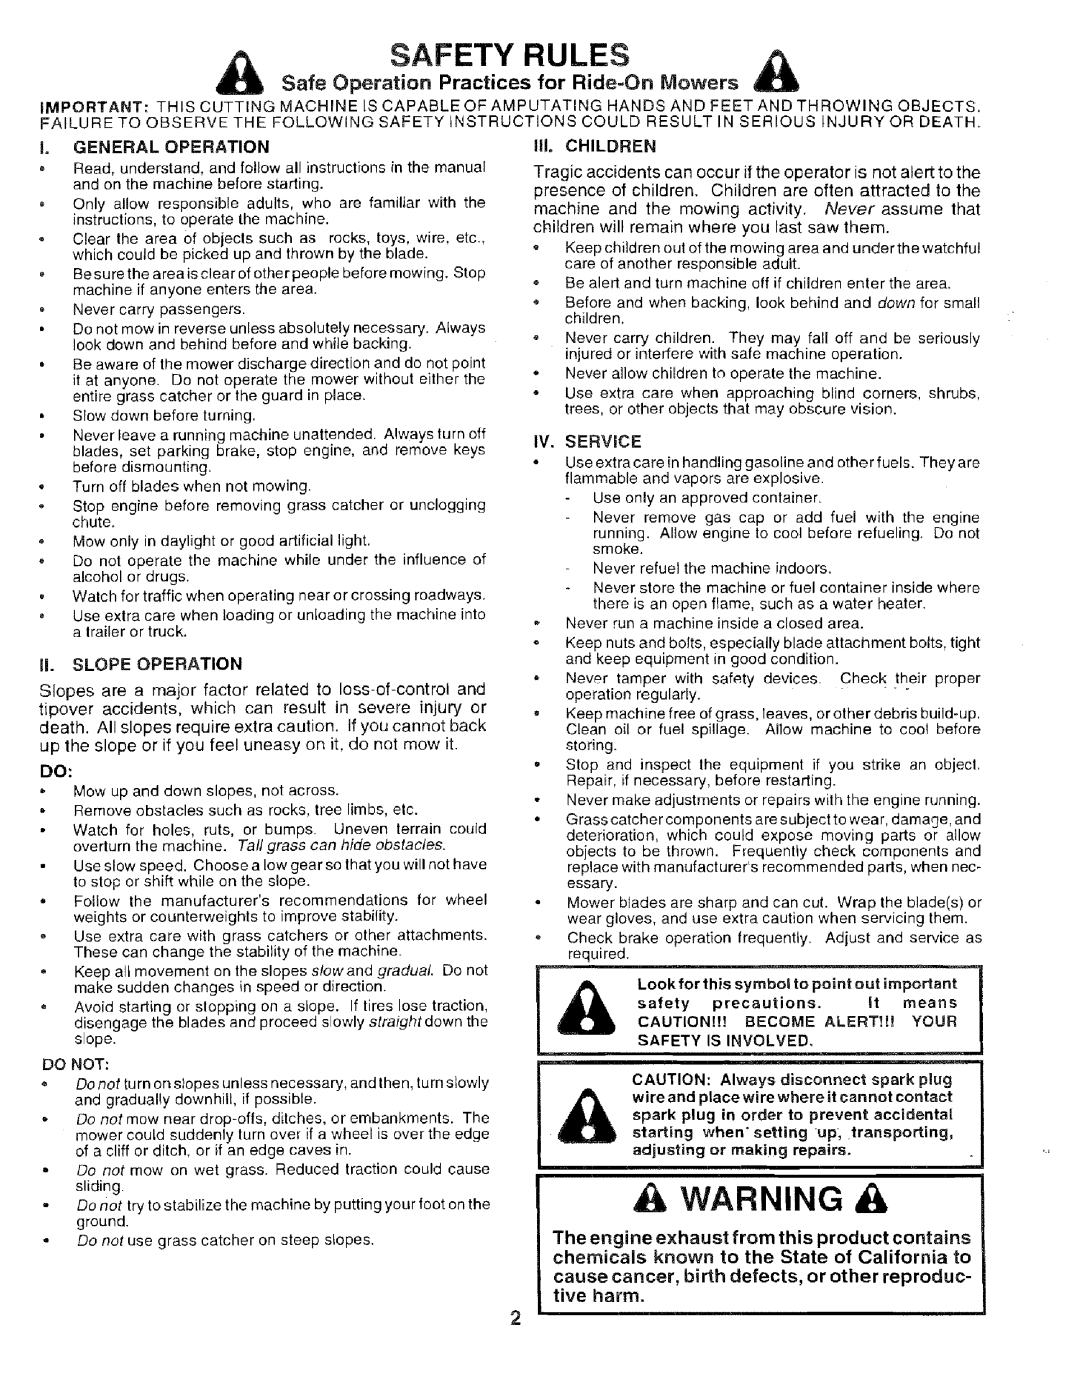 Sears 917.259567 owner manual Safety Rules, Safe Operation Practices for Ride=On Mowers, down, Service 